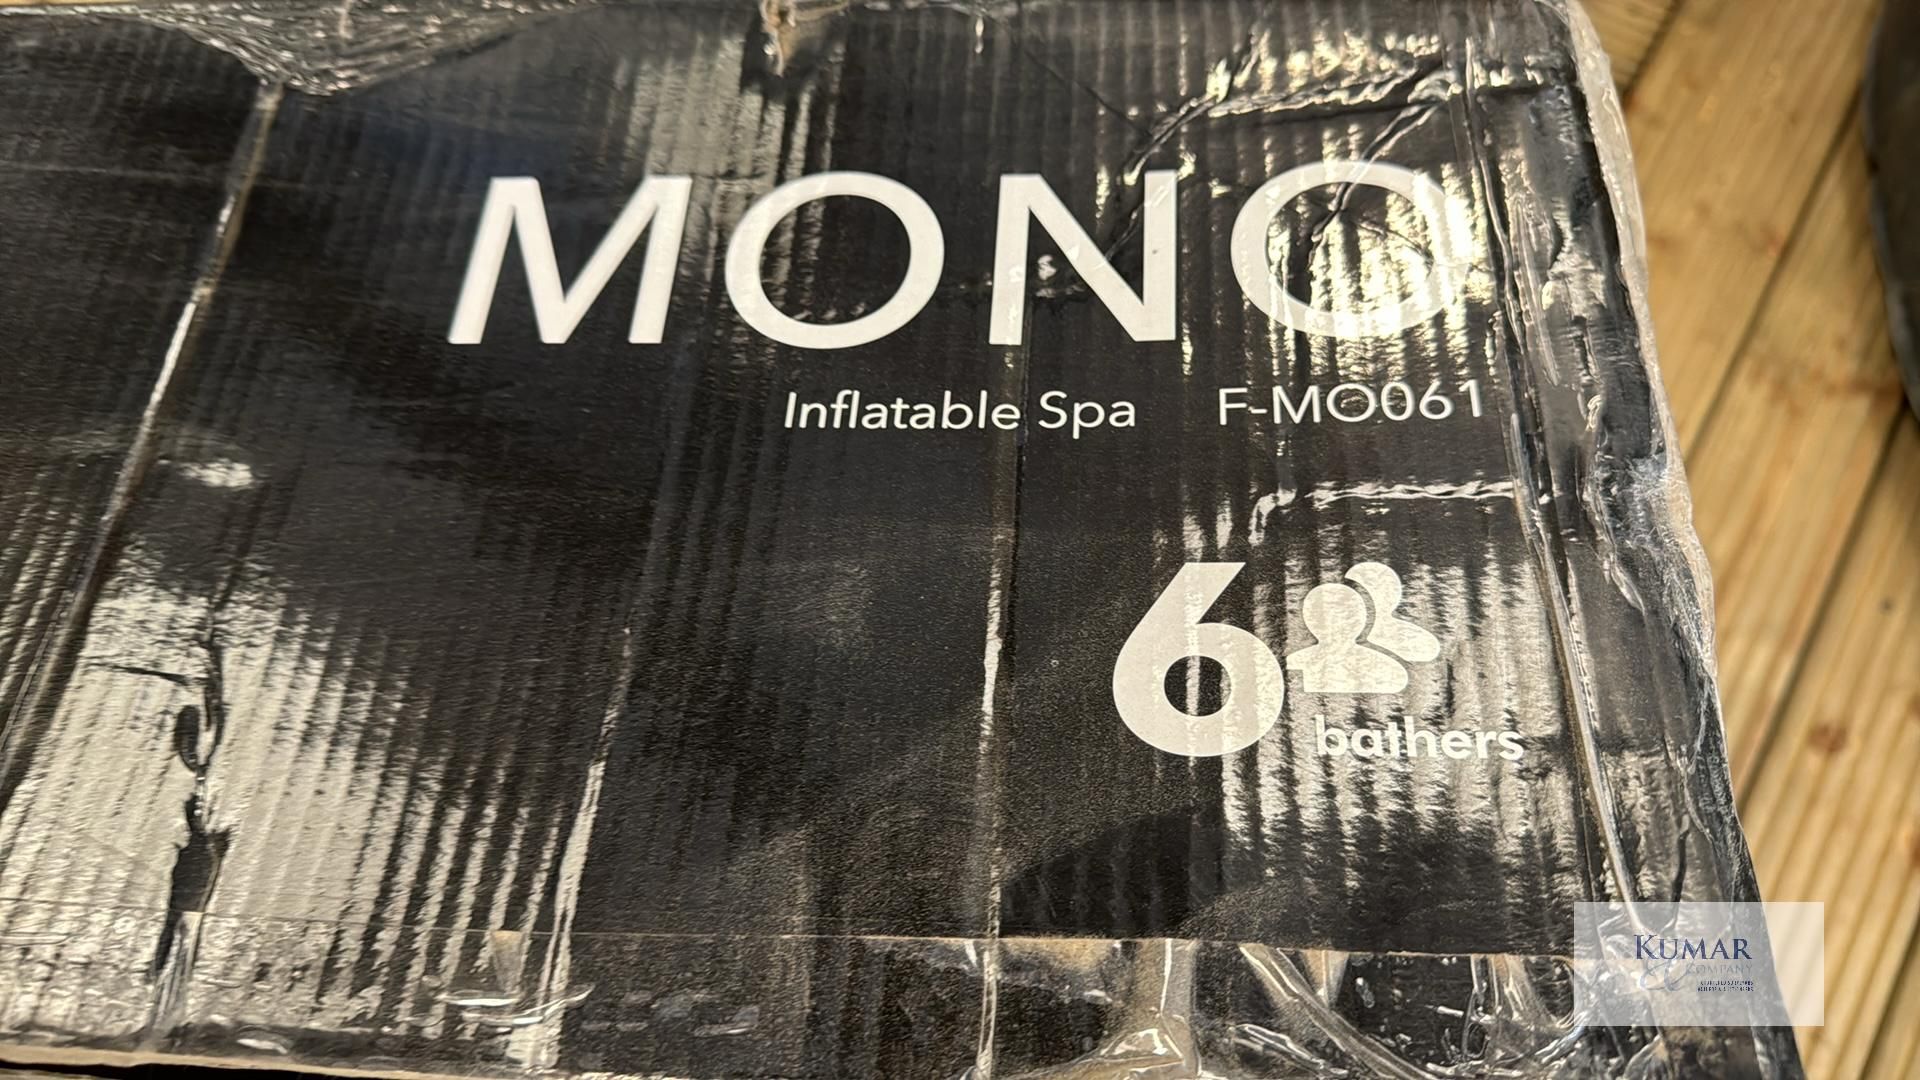 M Spa Mono Frame Series F-MO061 6 Bather Inflatable Spa Display Model Never Been Used with Box and - Image 15 of 21